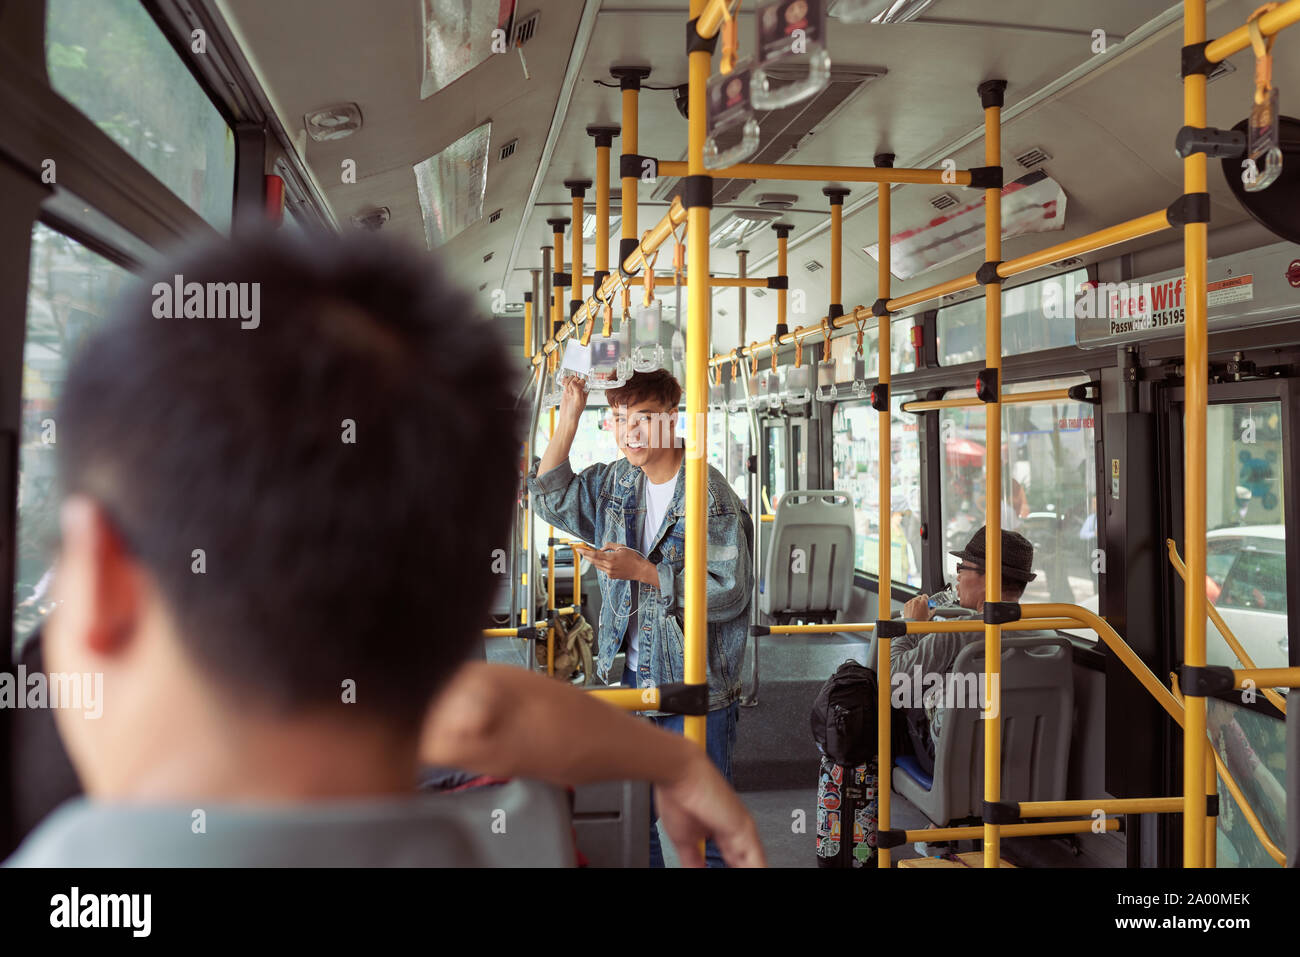 HO CHI MINH CITY, VIETNAM - 22 JULY, 2017: Transport: handsome young man in a blue denim jacket using smartphone in bus Stock Photo